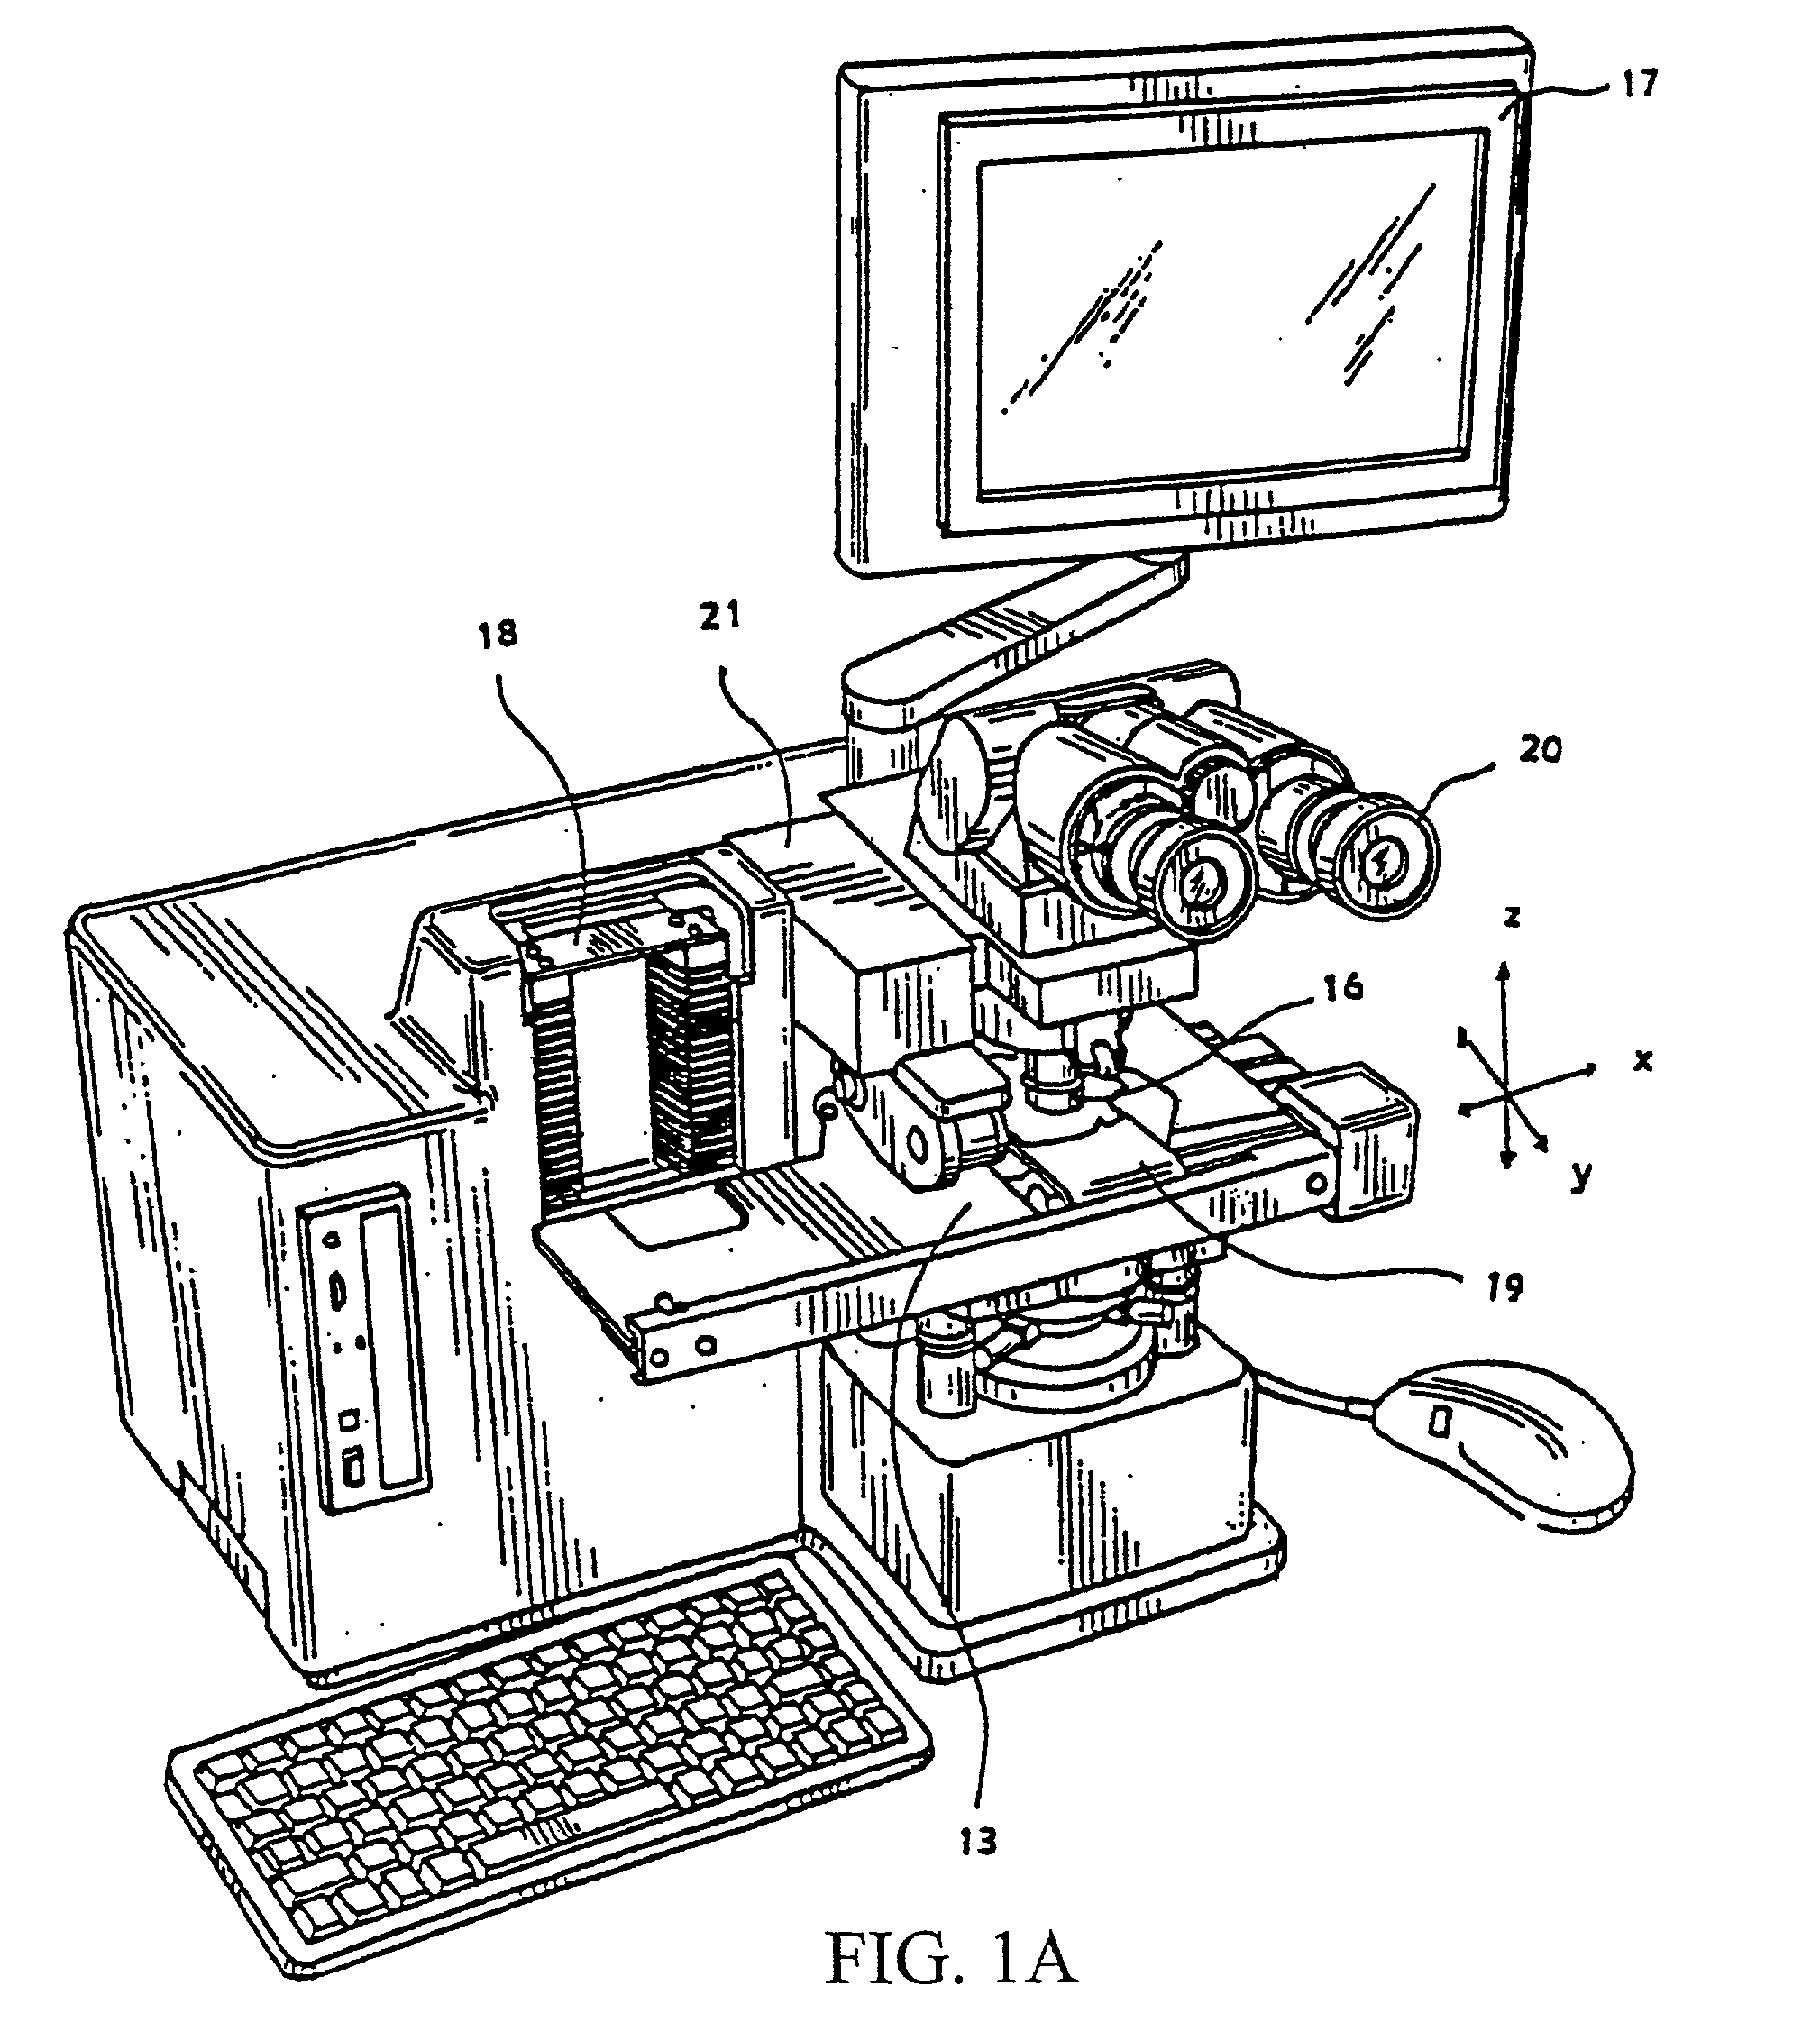 High-precision computer-aided microscope system